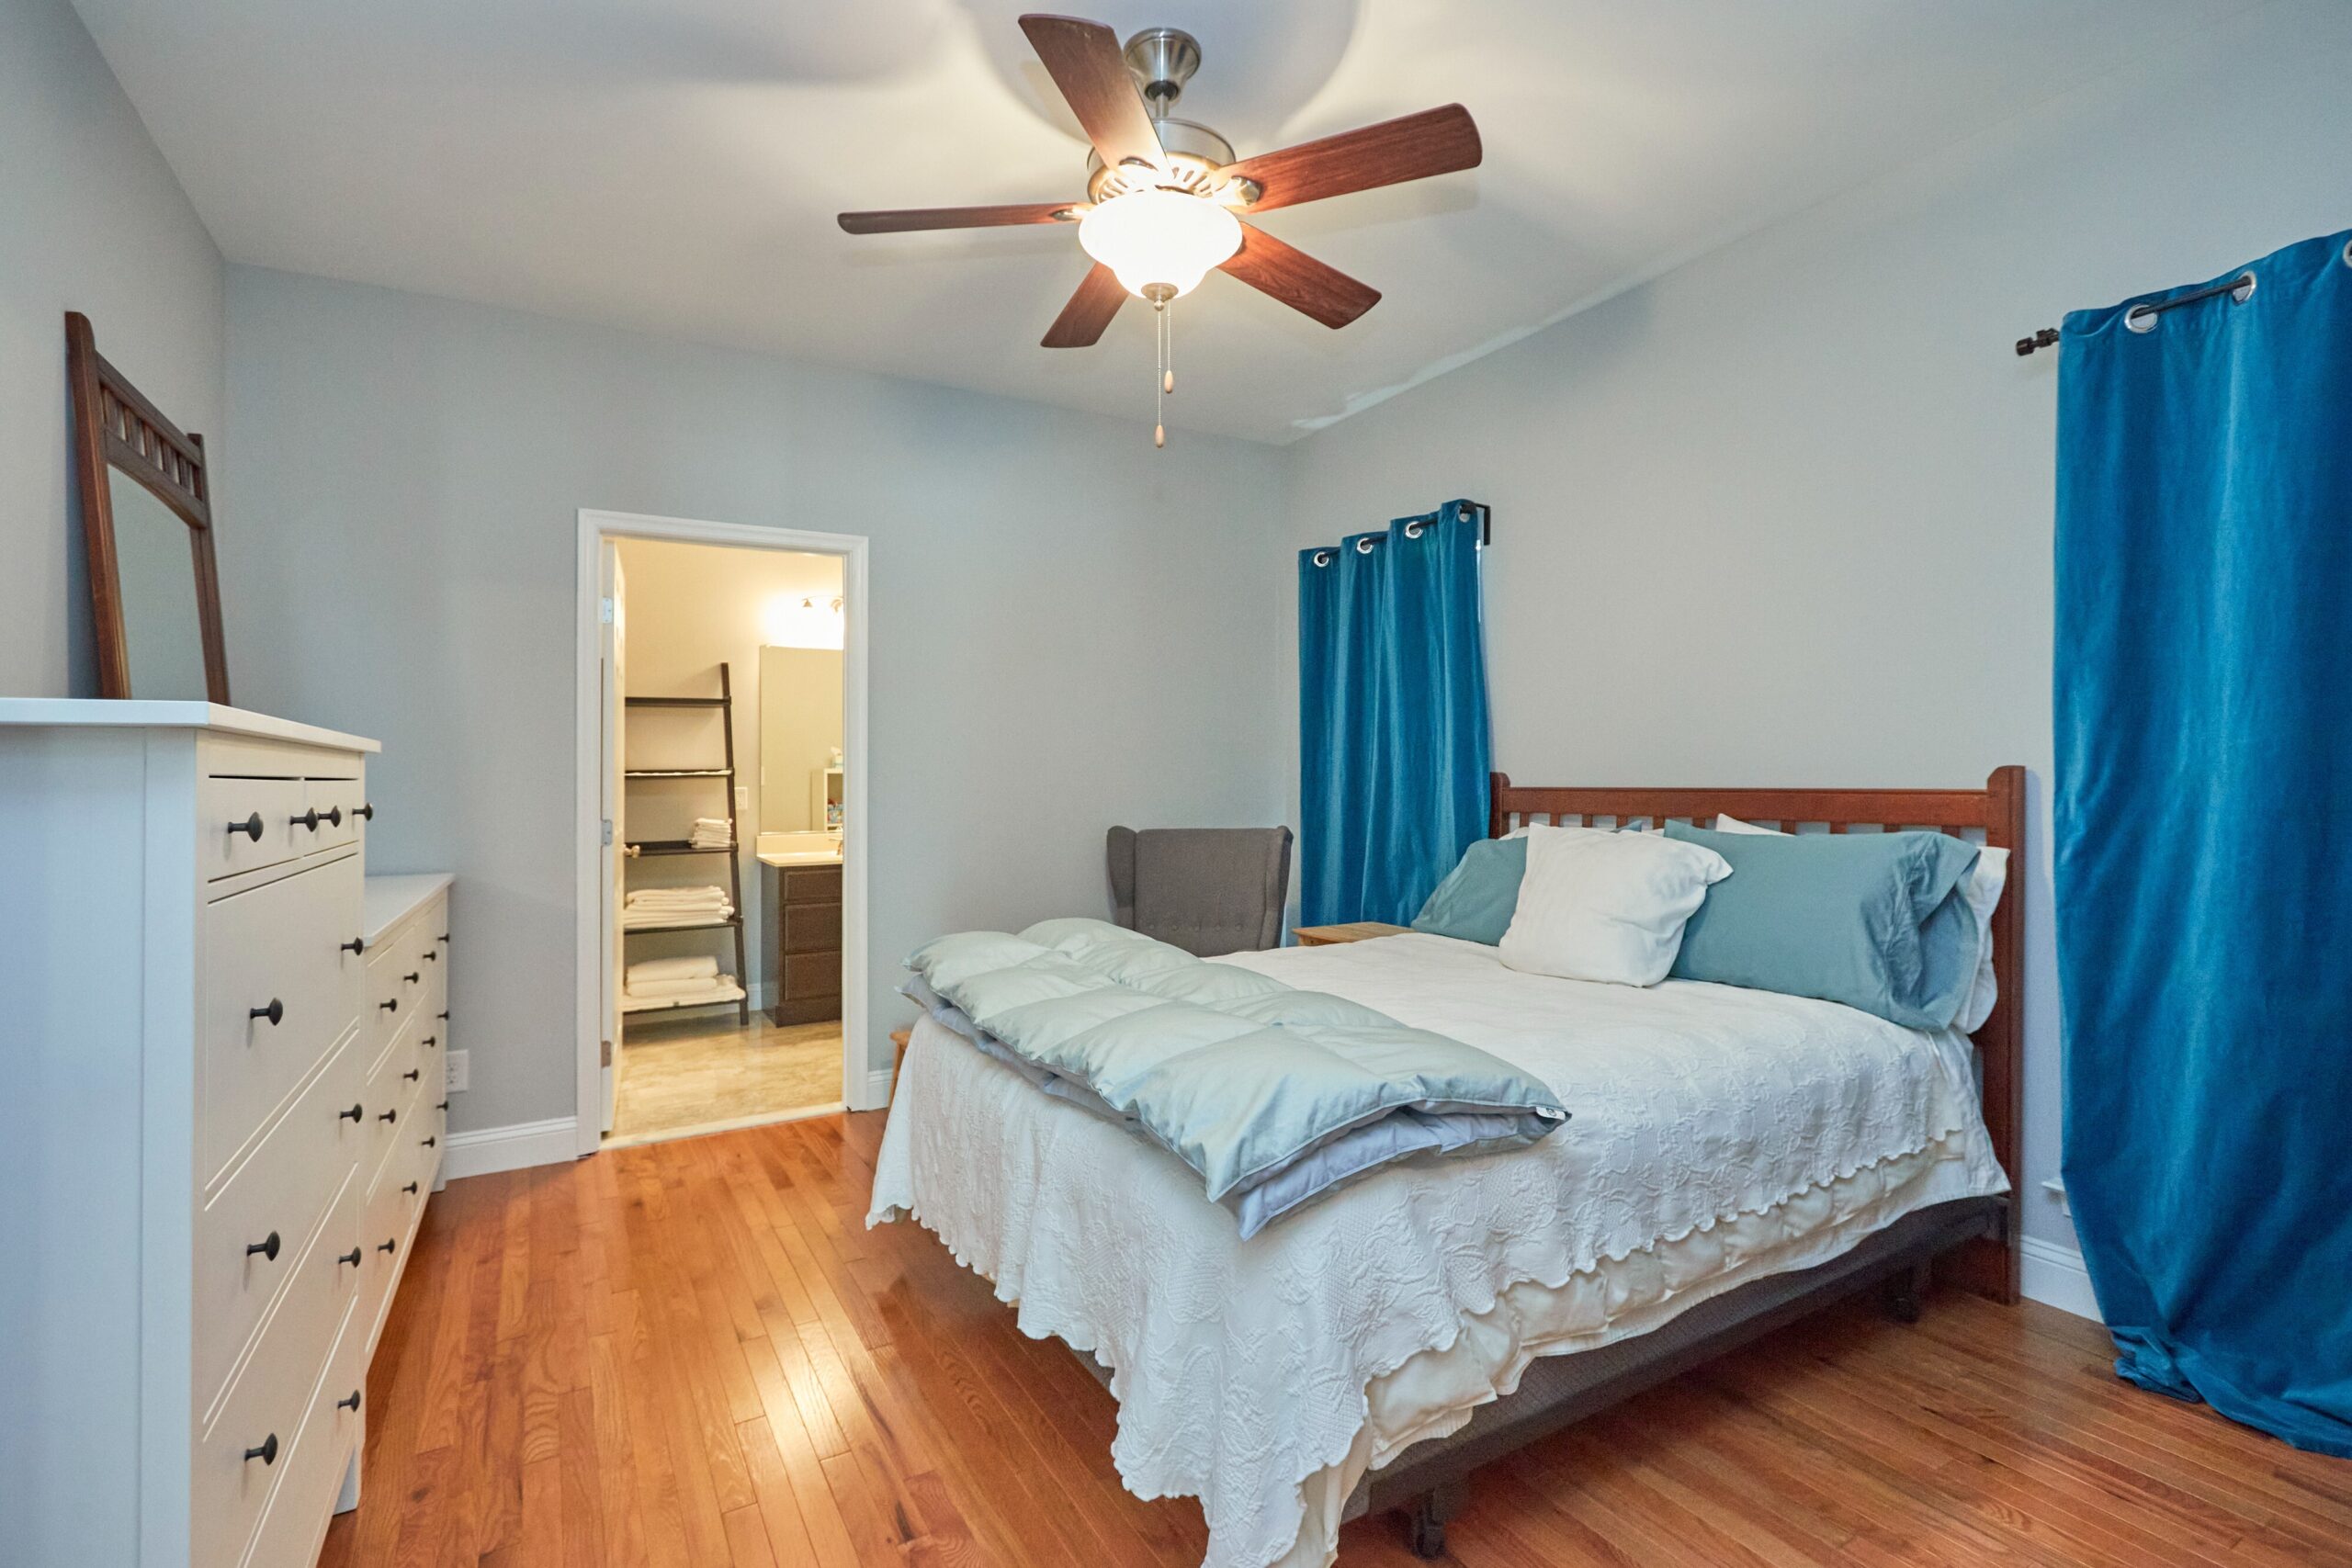 Professional interior photograph of 384 C Street - showing the primary bedroom with hardwood floors, ceiling fan, and door to ensuite bathroom